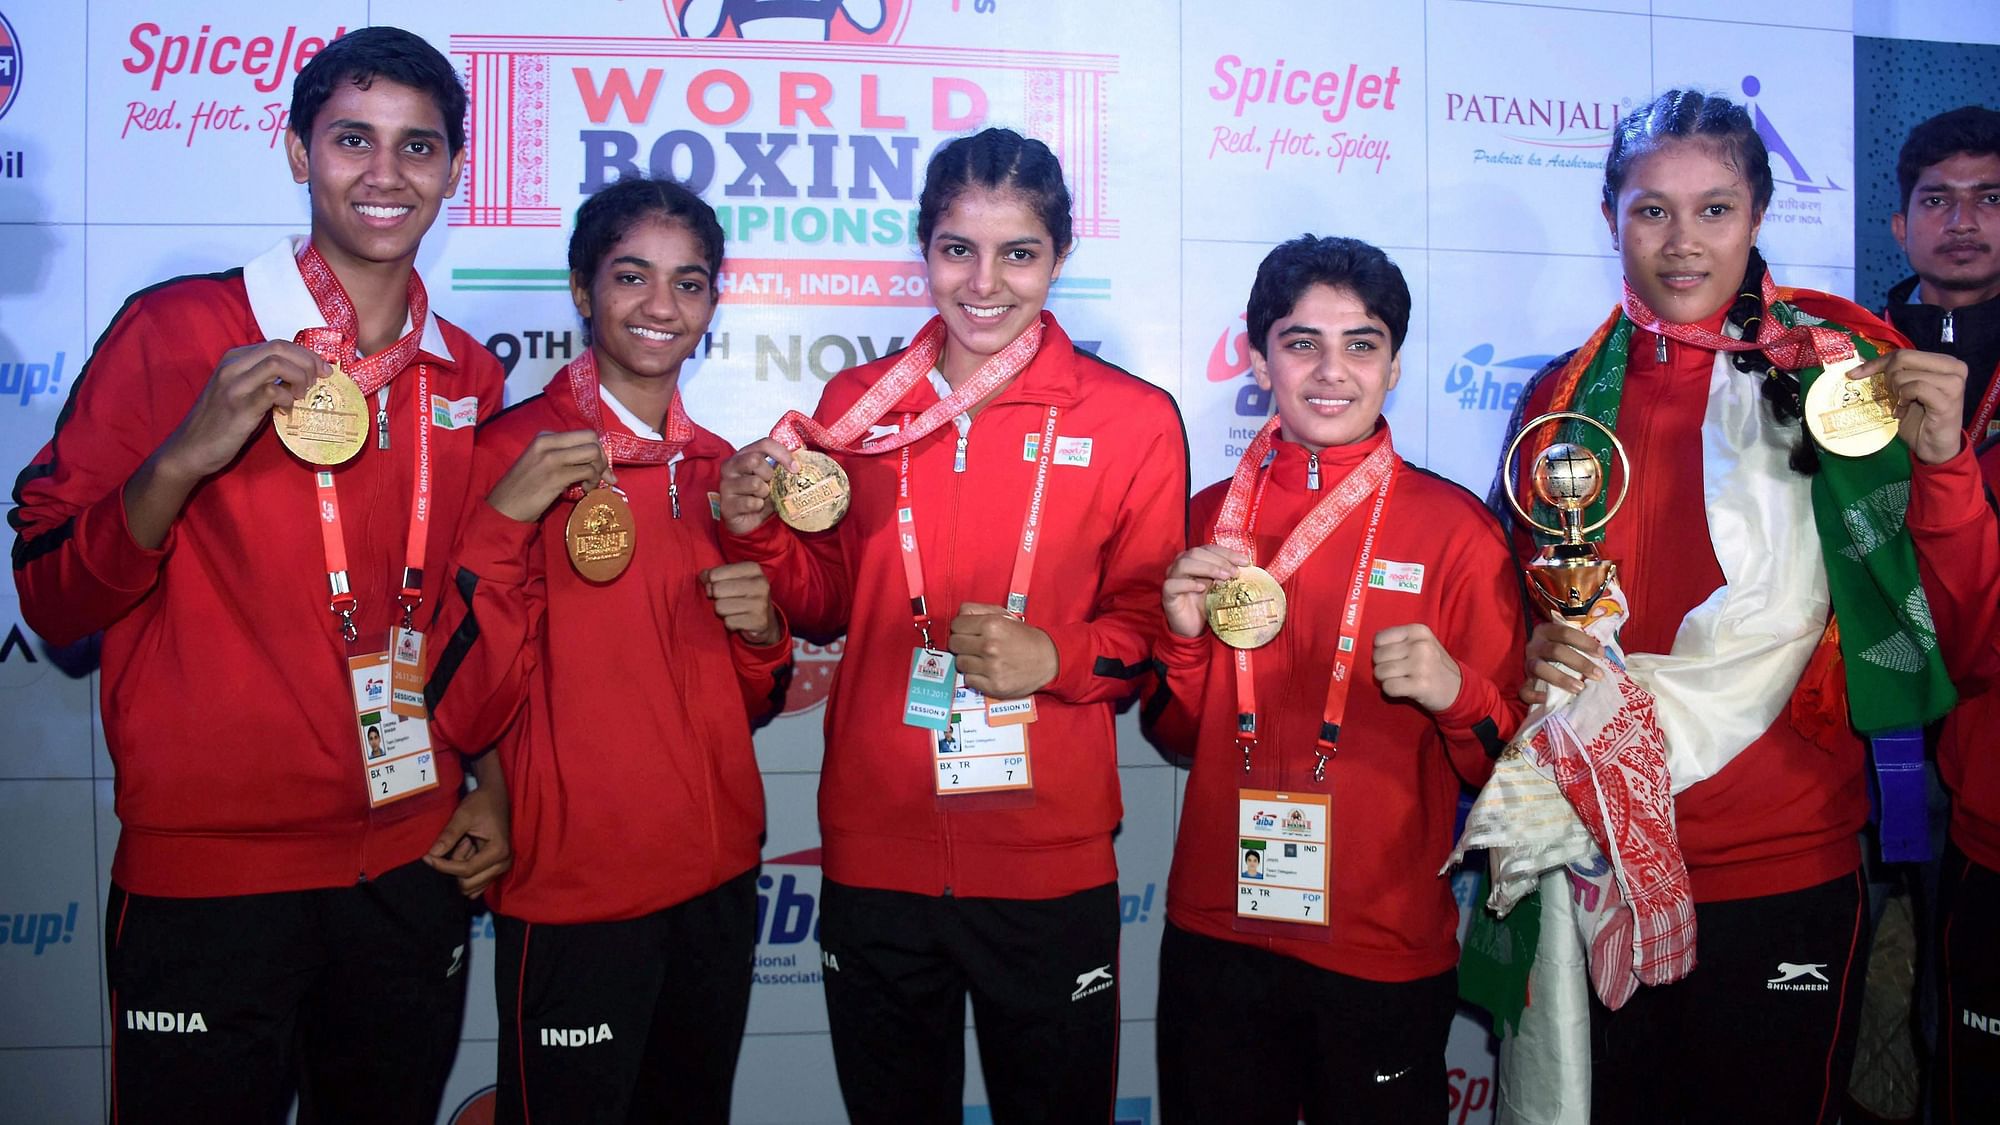 India’s gold medalist boxers.